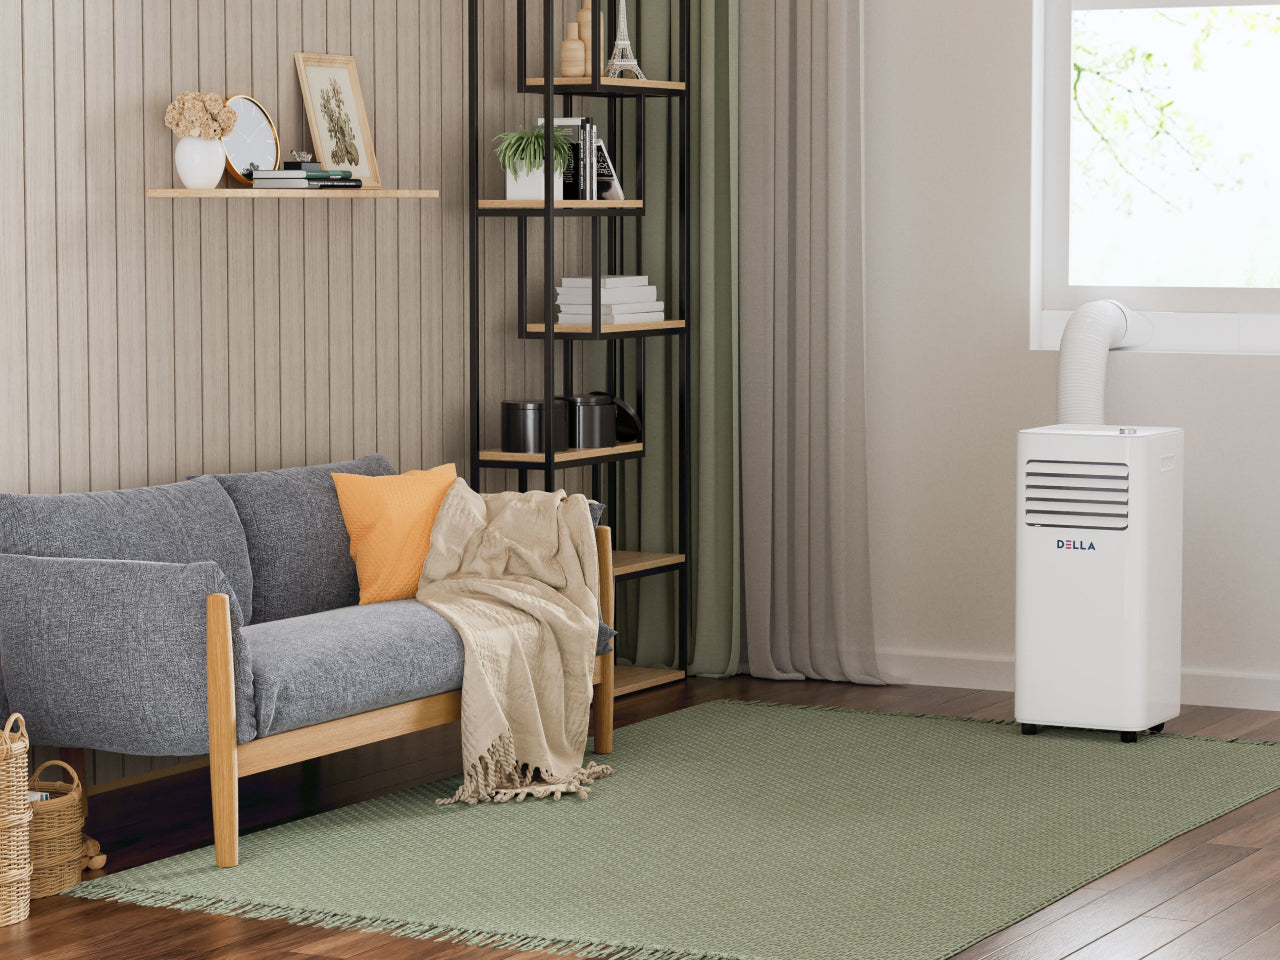 Choosing the Right AC for Your Space